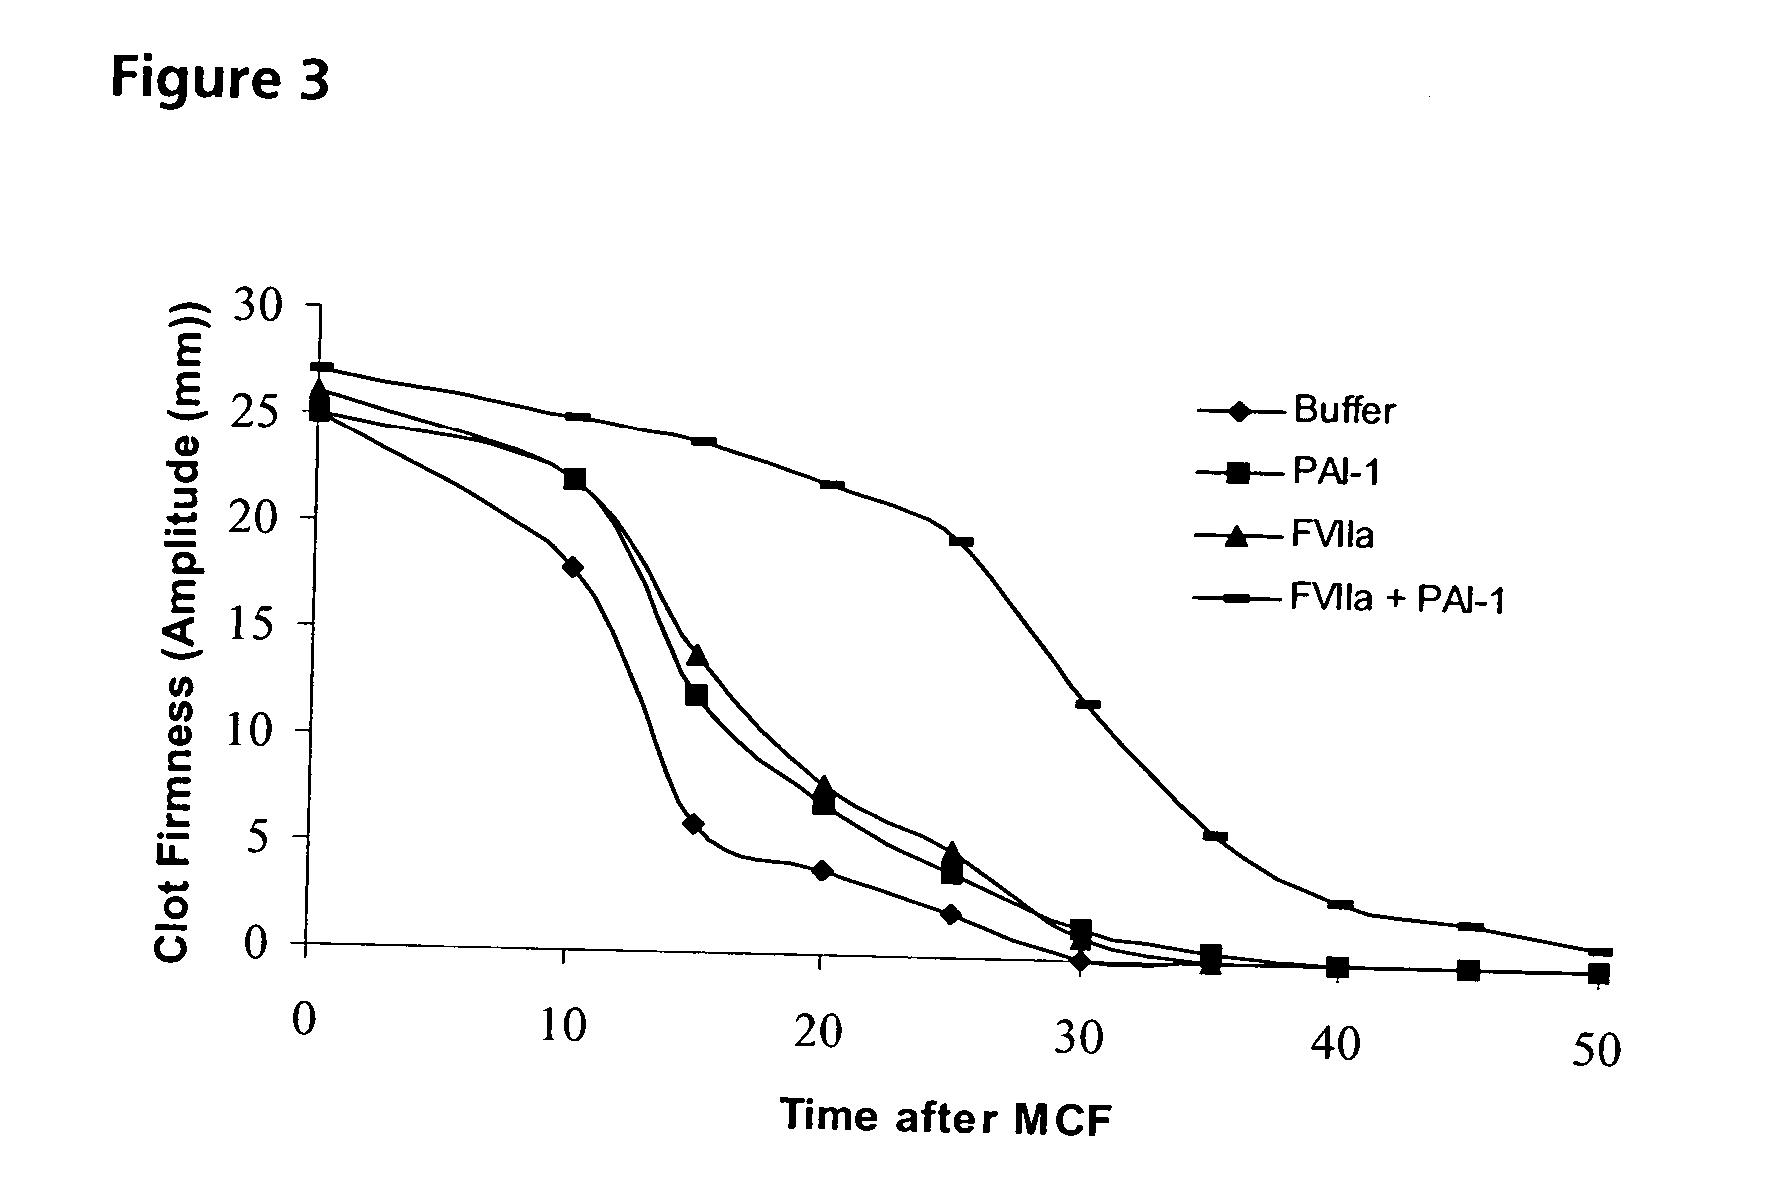 Pharmaceutical composition comprising factor VII polypeptide and PAI-1 polypeptide